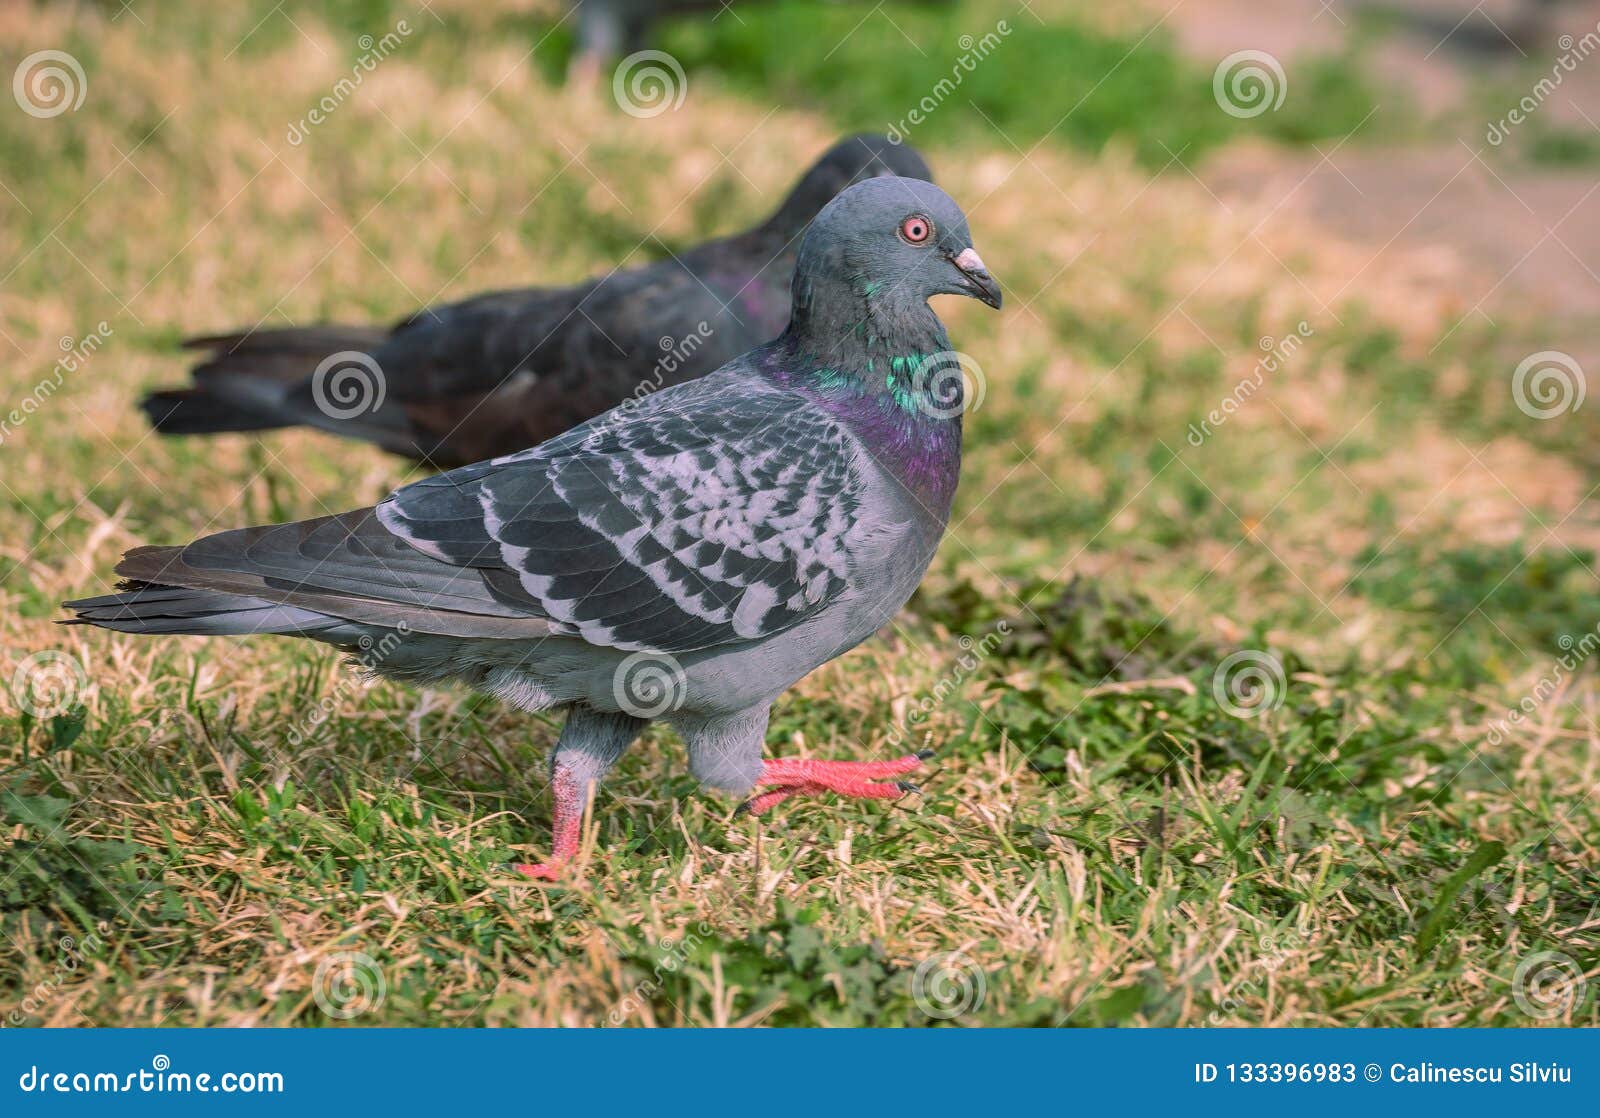 Pigeon Colored on the Grass Stock Image - Image of grace, background:  133396983